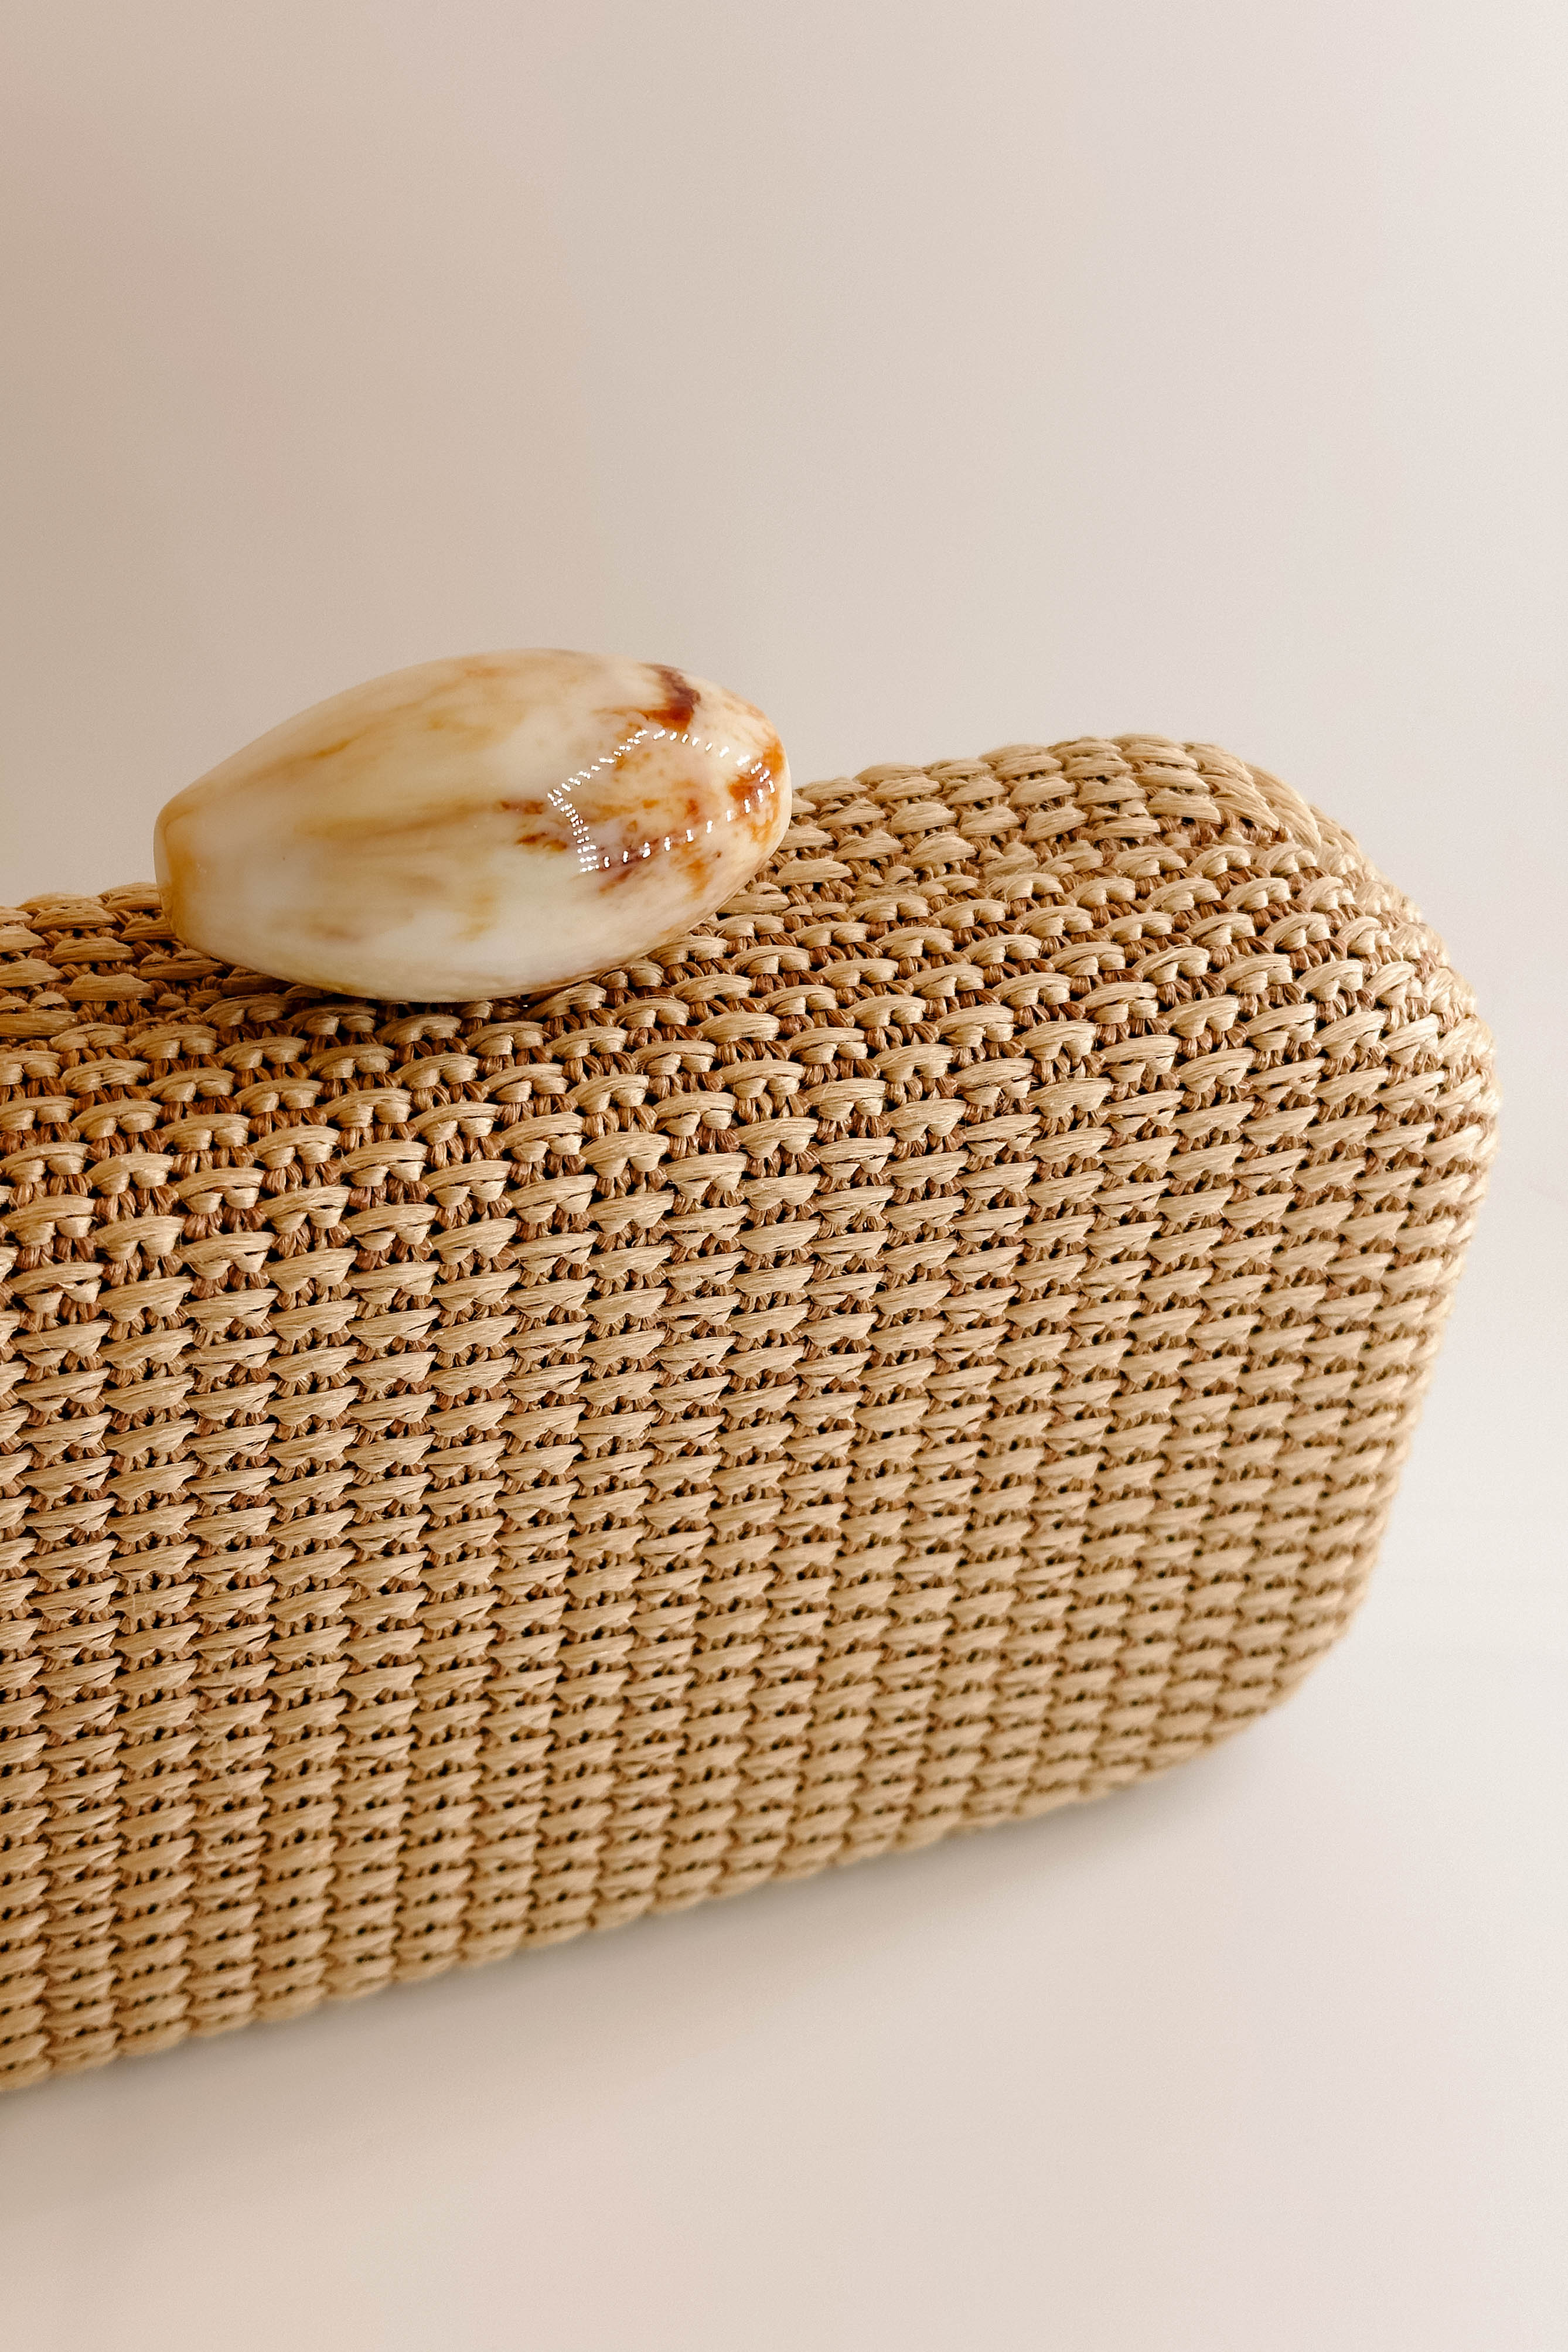 Detailed view of the pearl closure on the Frankie Clutch. It features a woven natural texture with an oval pearl closure. On the inside, is a gold chain attachment to be transformed as a crossbody.